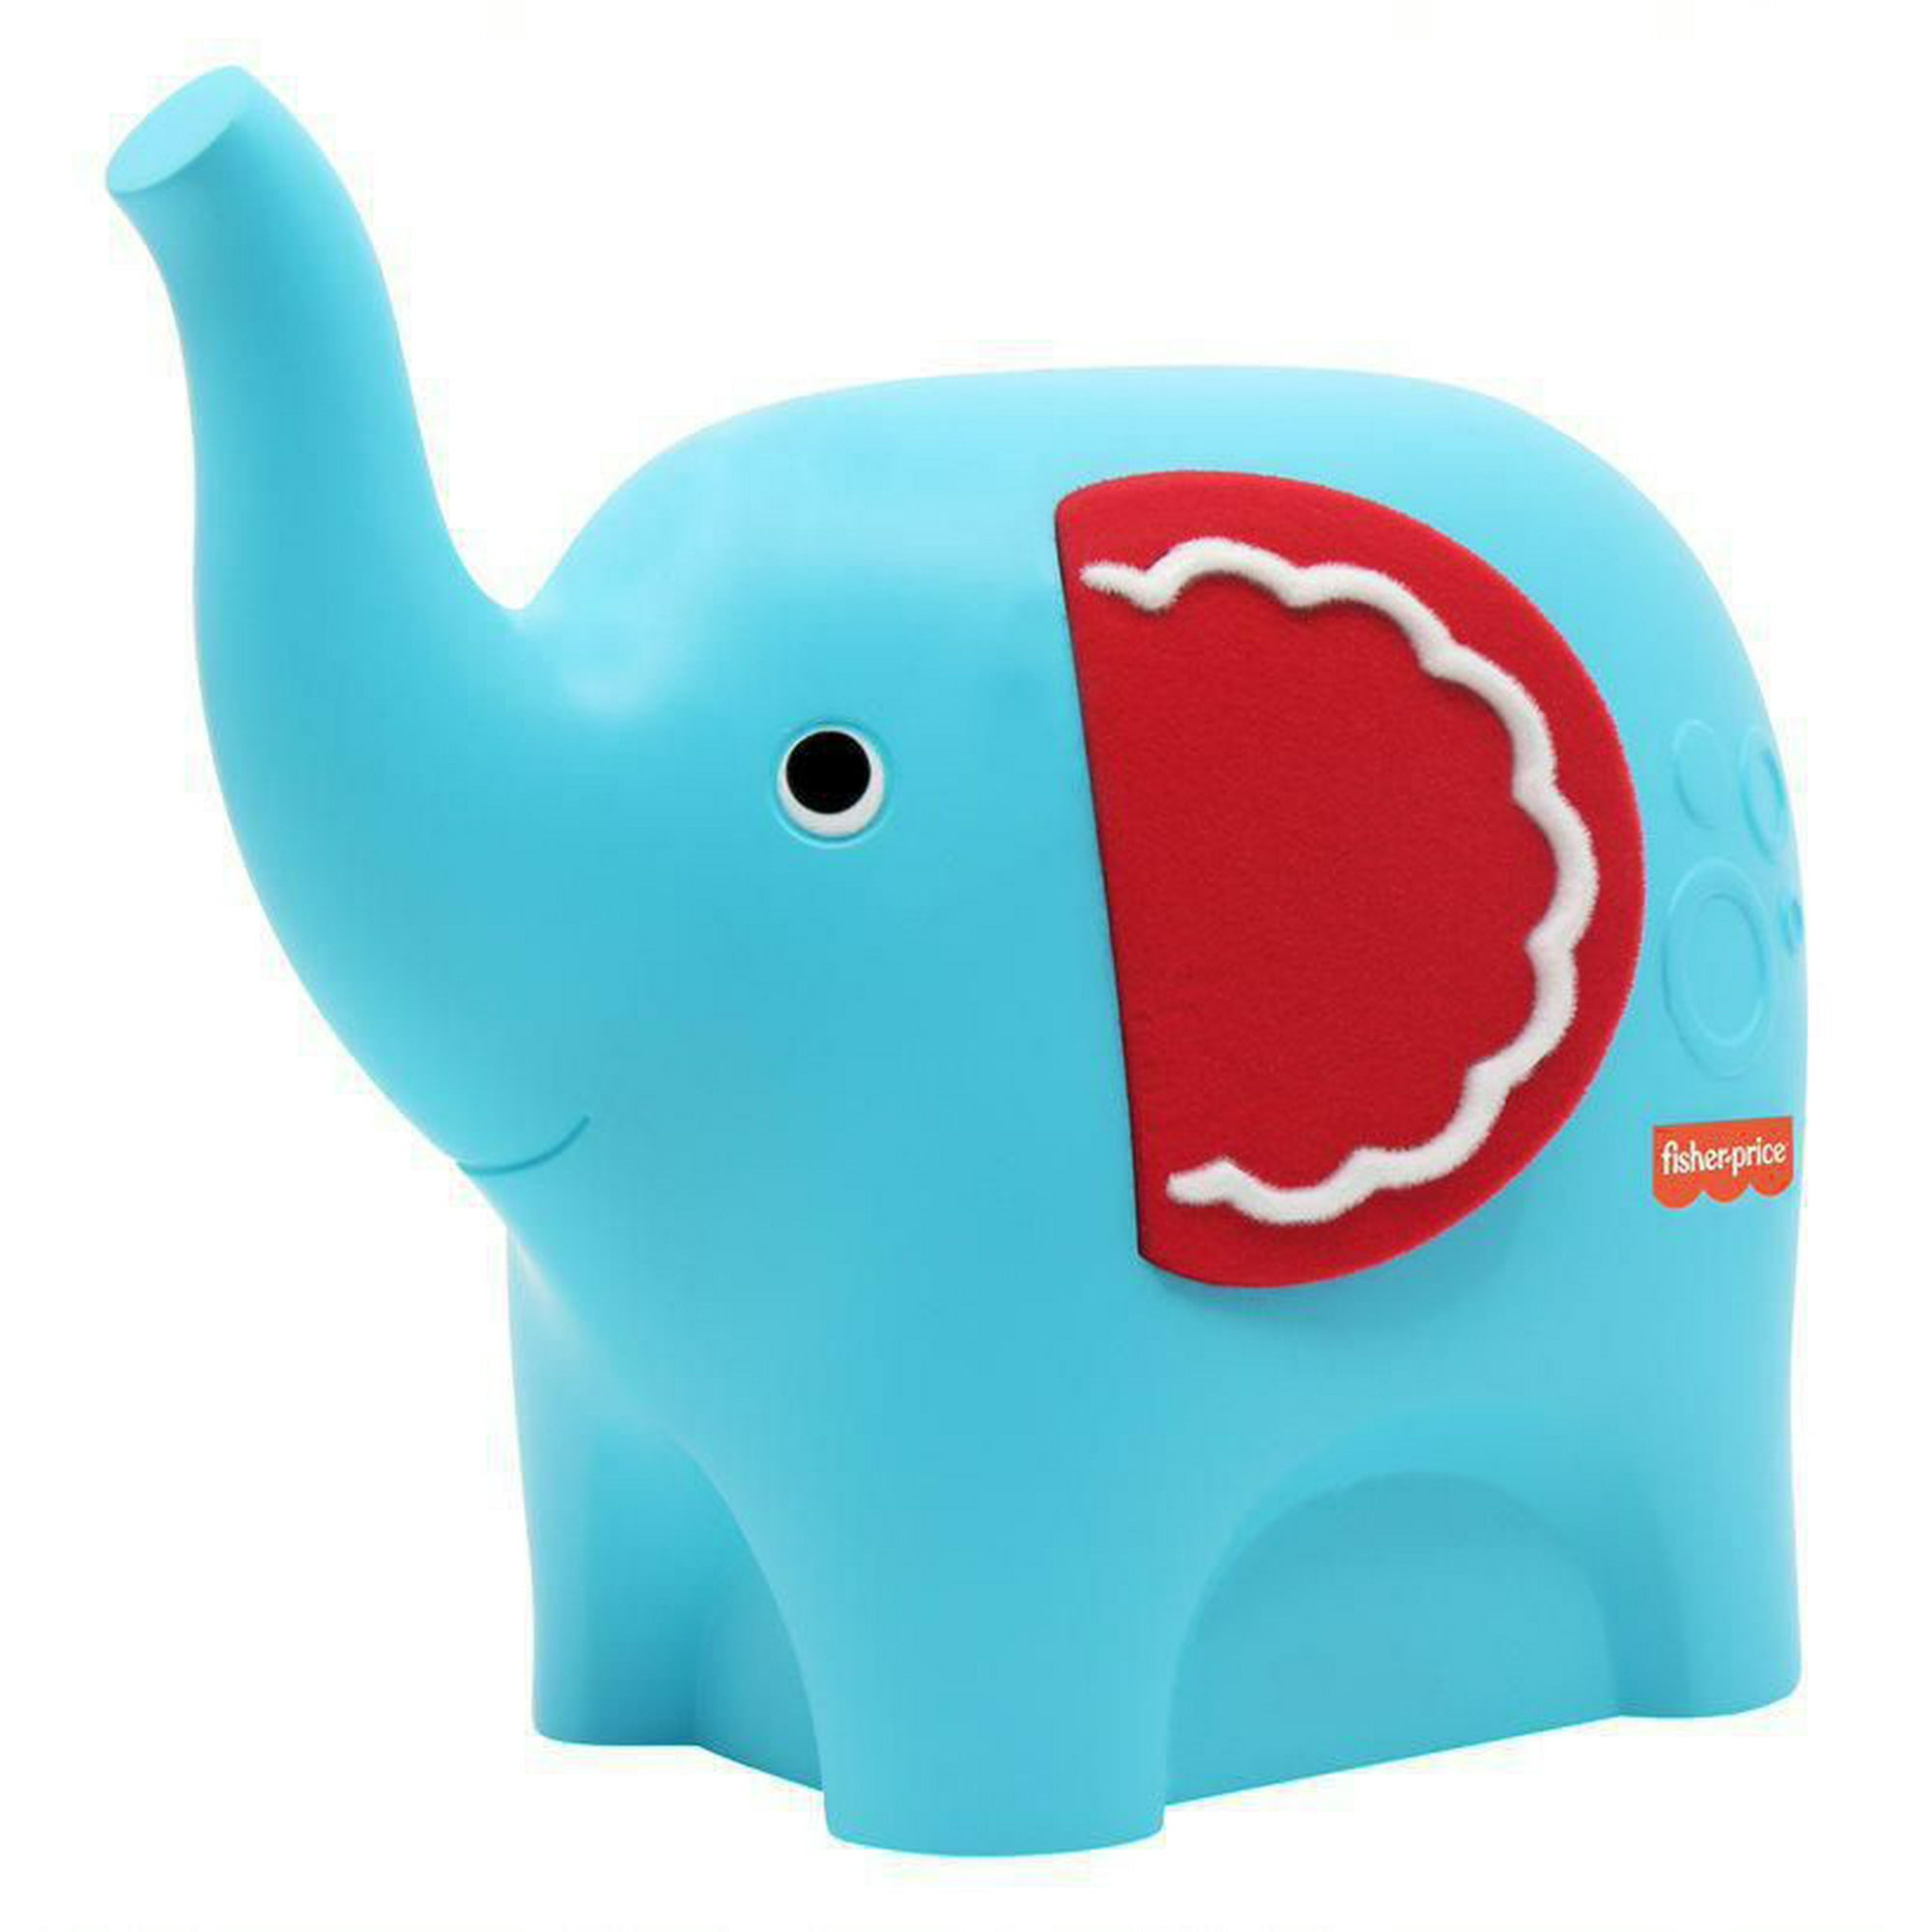 Blue elephant toy on wheels with red string to pull Stock Photo